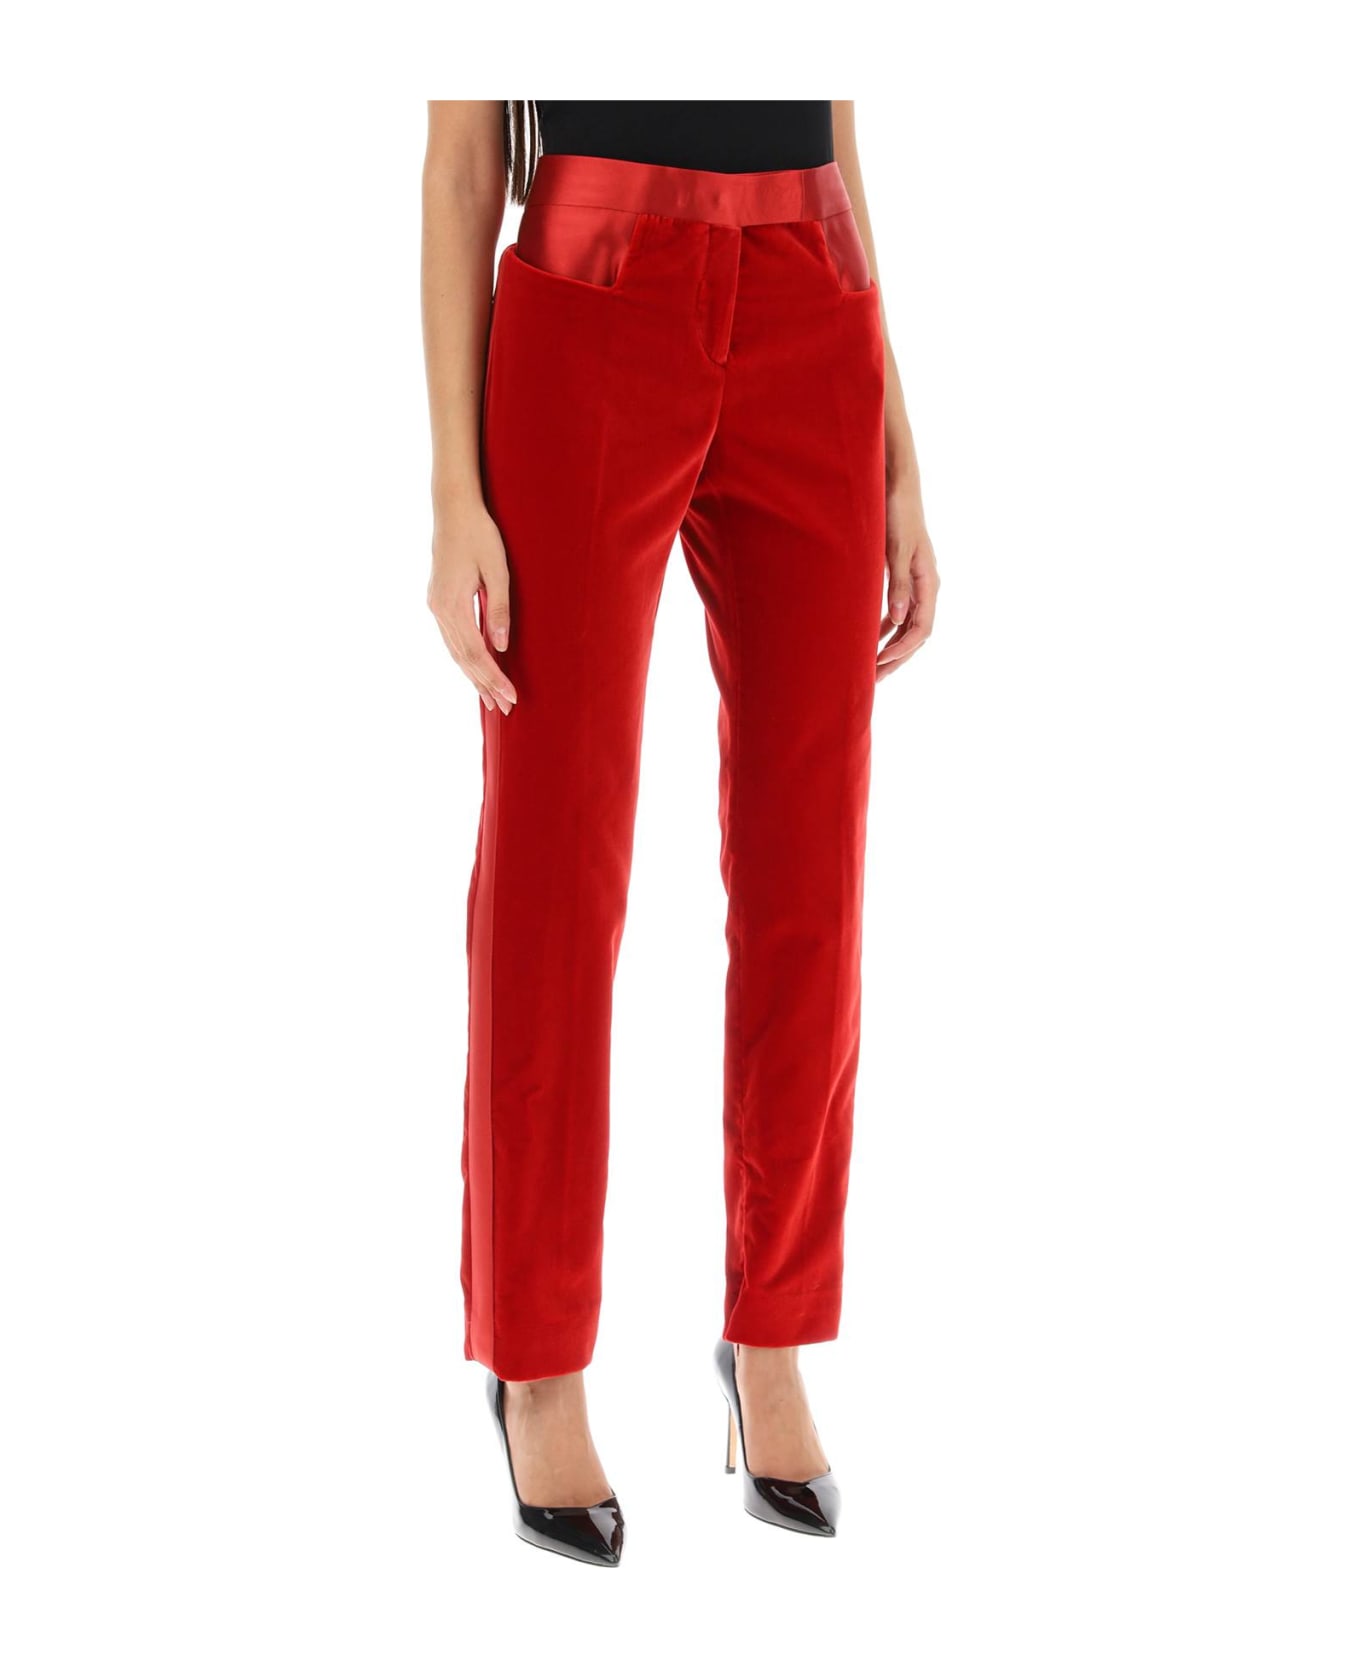 Tom Ford Velvet Pants With Satin Bands - RED (Red)